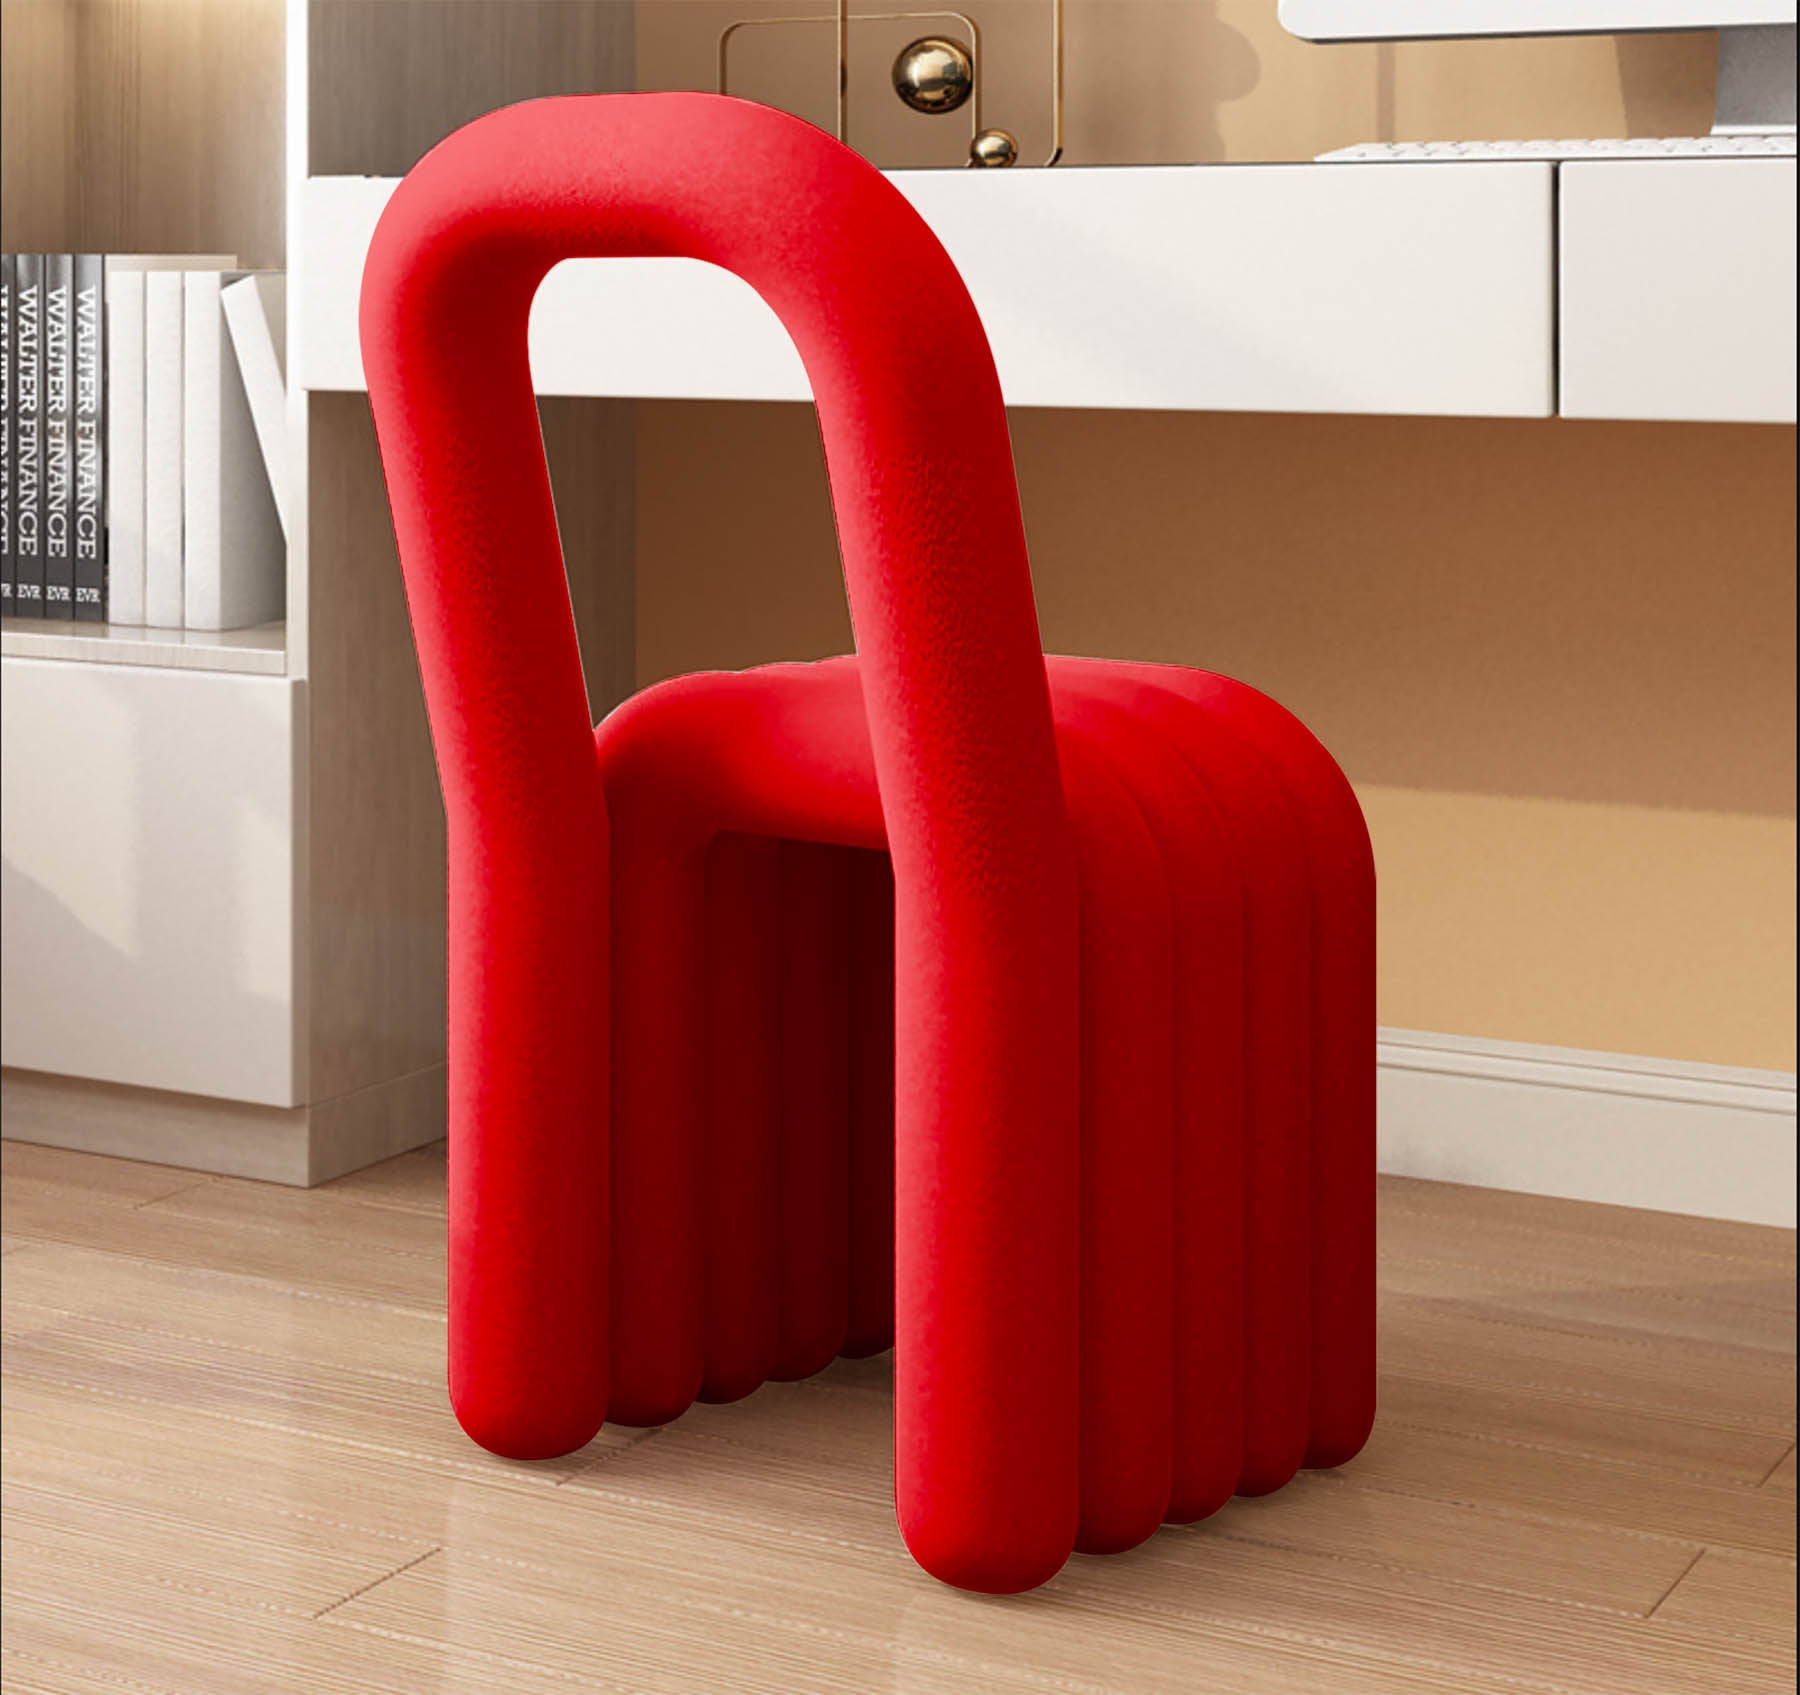 Replica Bold Chair - Red